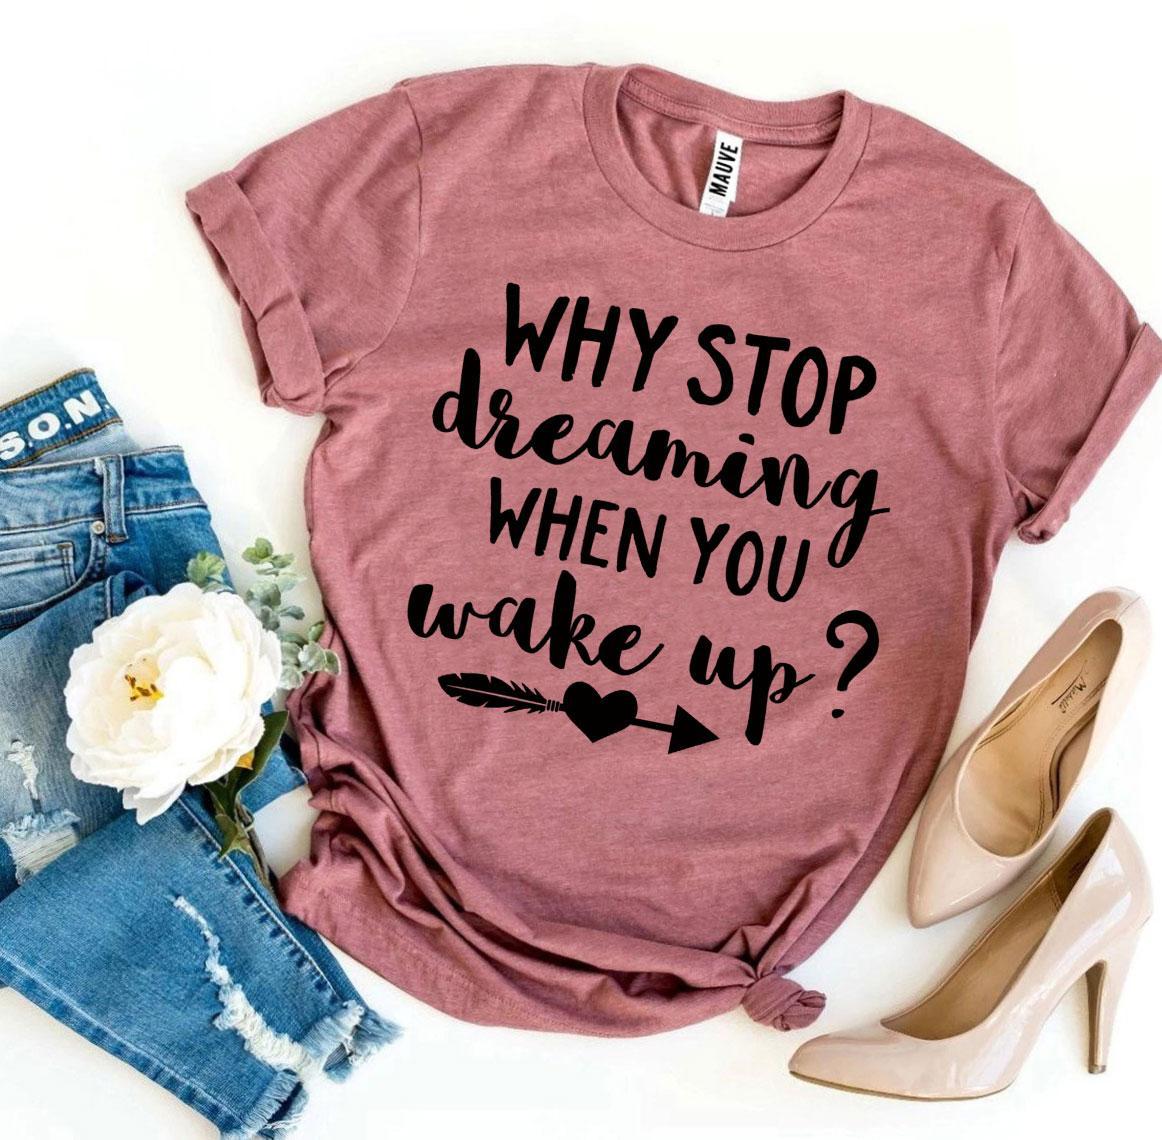 Why Stop Dreaming When You Wake Up? T-shirt